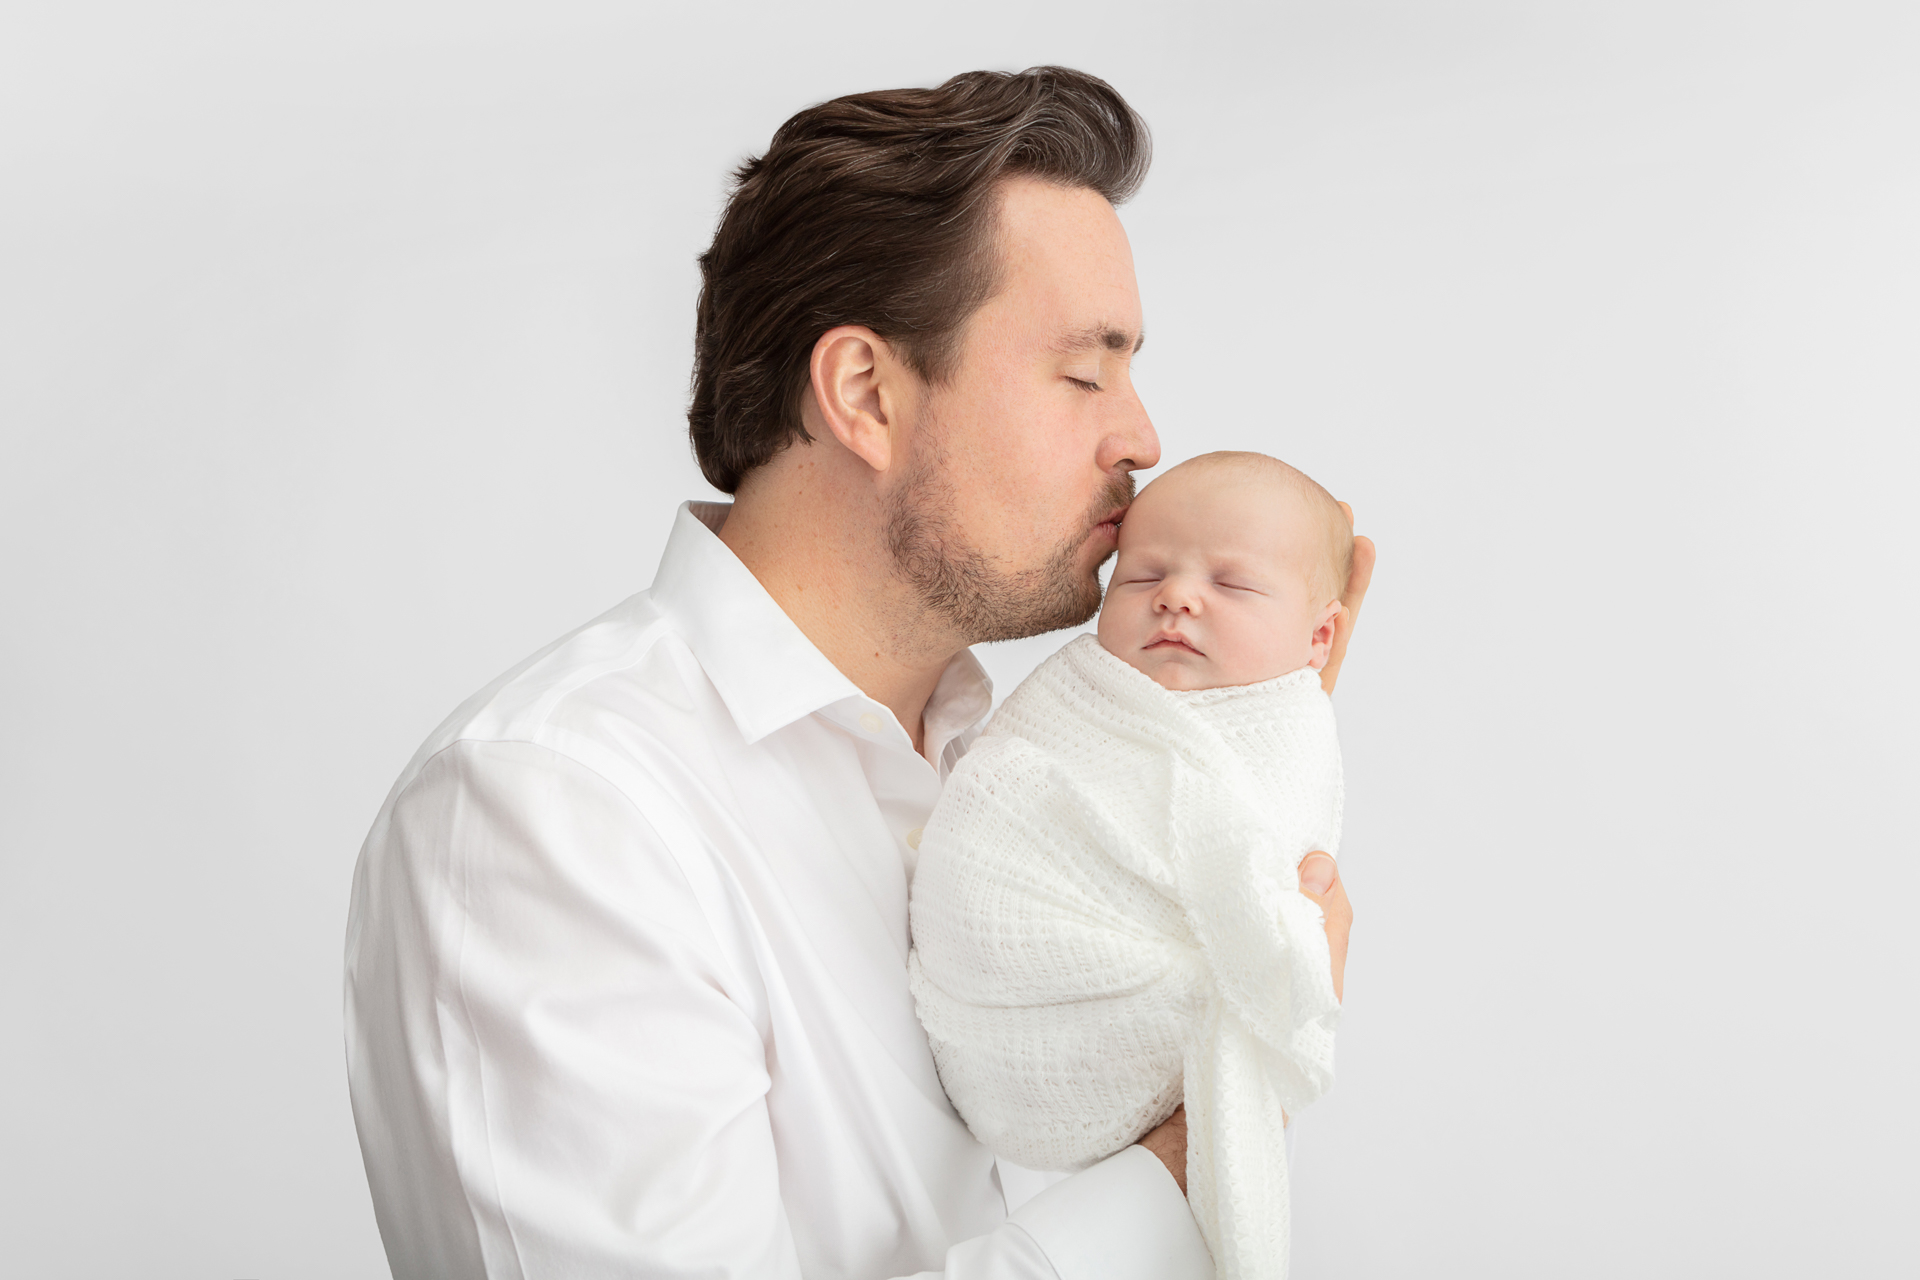 new dad in white shirt holding his son up and kissing his head; baby boy wrapped in white